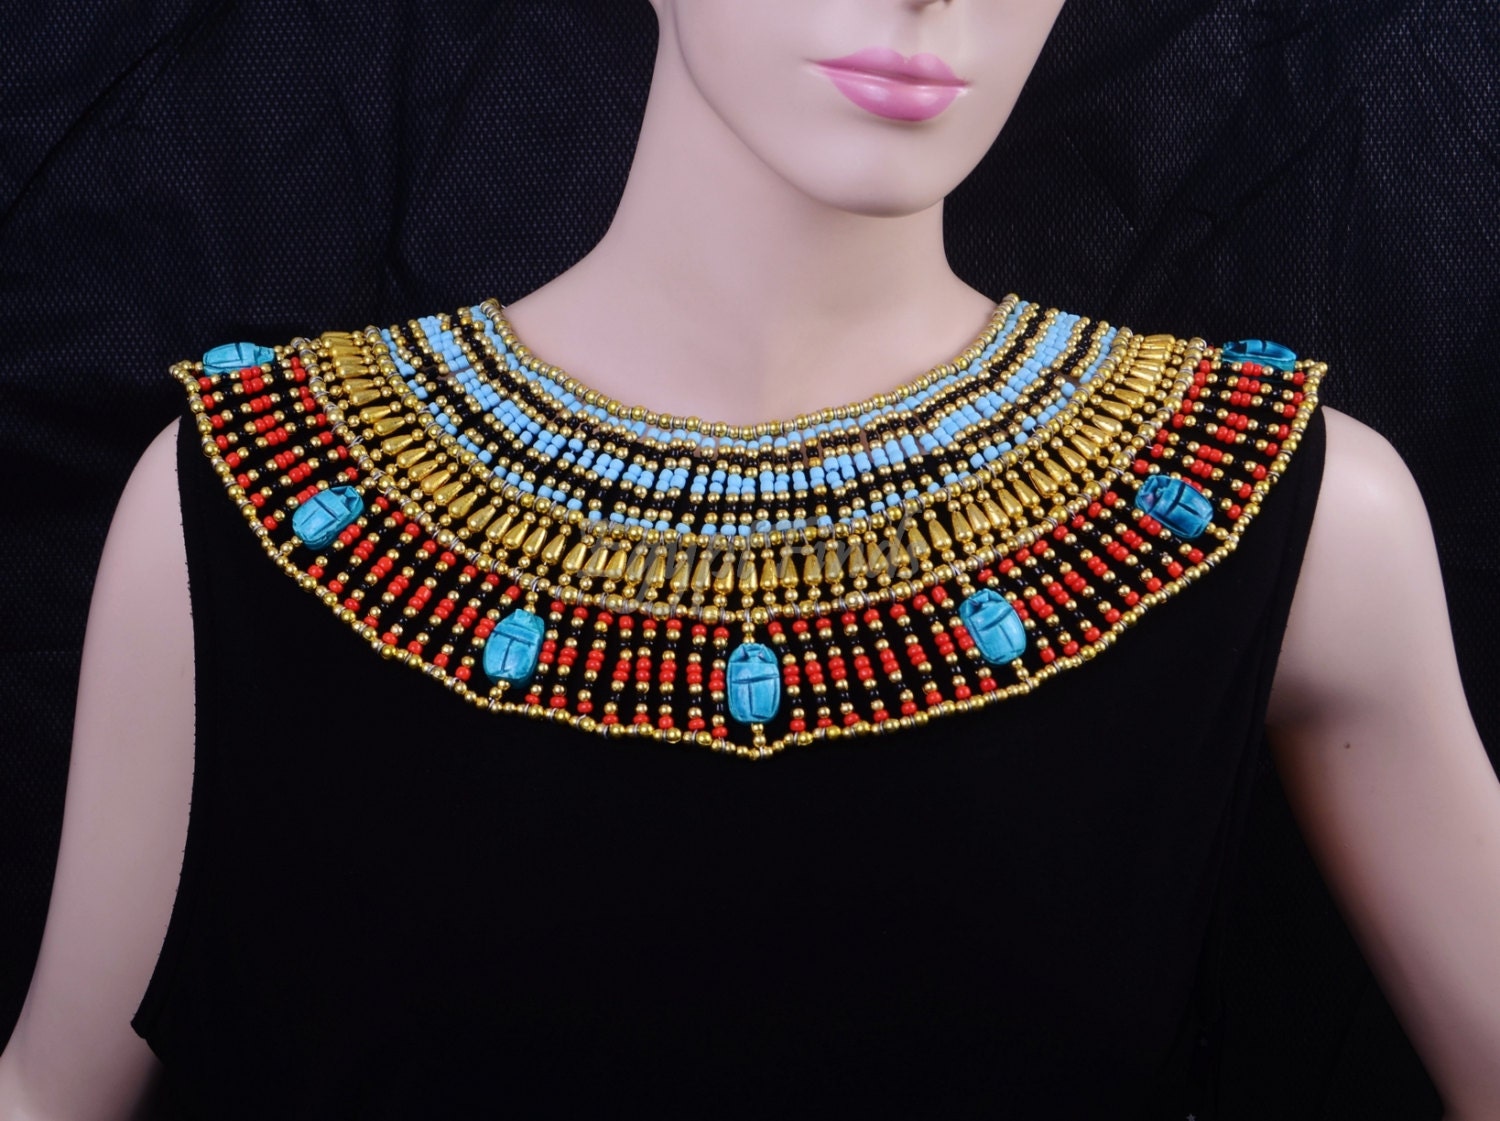 Egyptian Hand Made Multi Beaded Scarab Beetle Beads Cleopatra Nefertiti Queen 9.5 Necklace Collar Choker Pendant Christmas Halloween Ancient Egypt Pharaoh Costume Accessory Jewelry Belly Dance 234